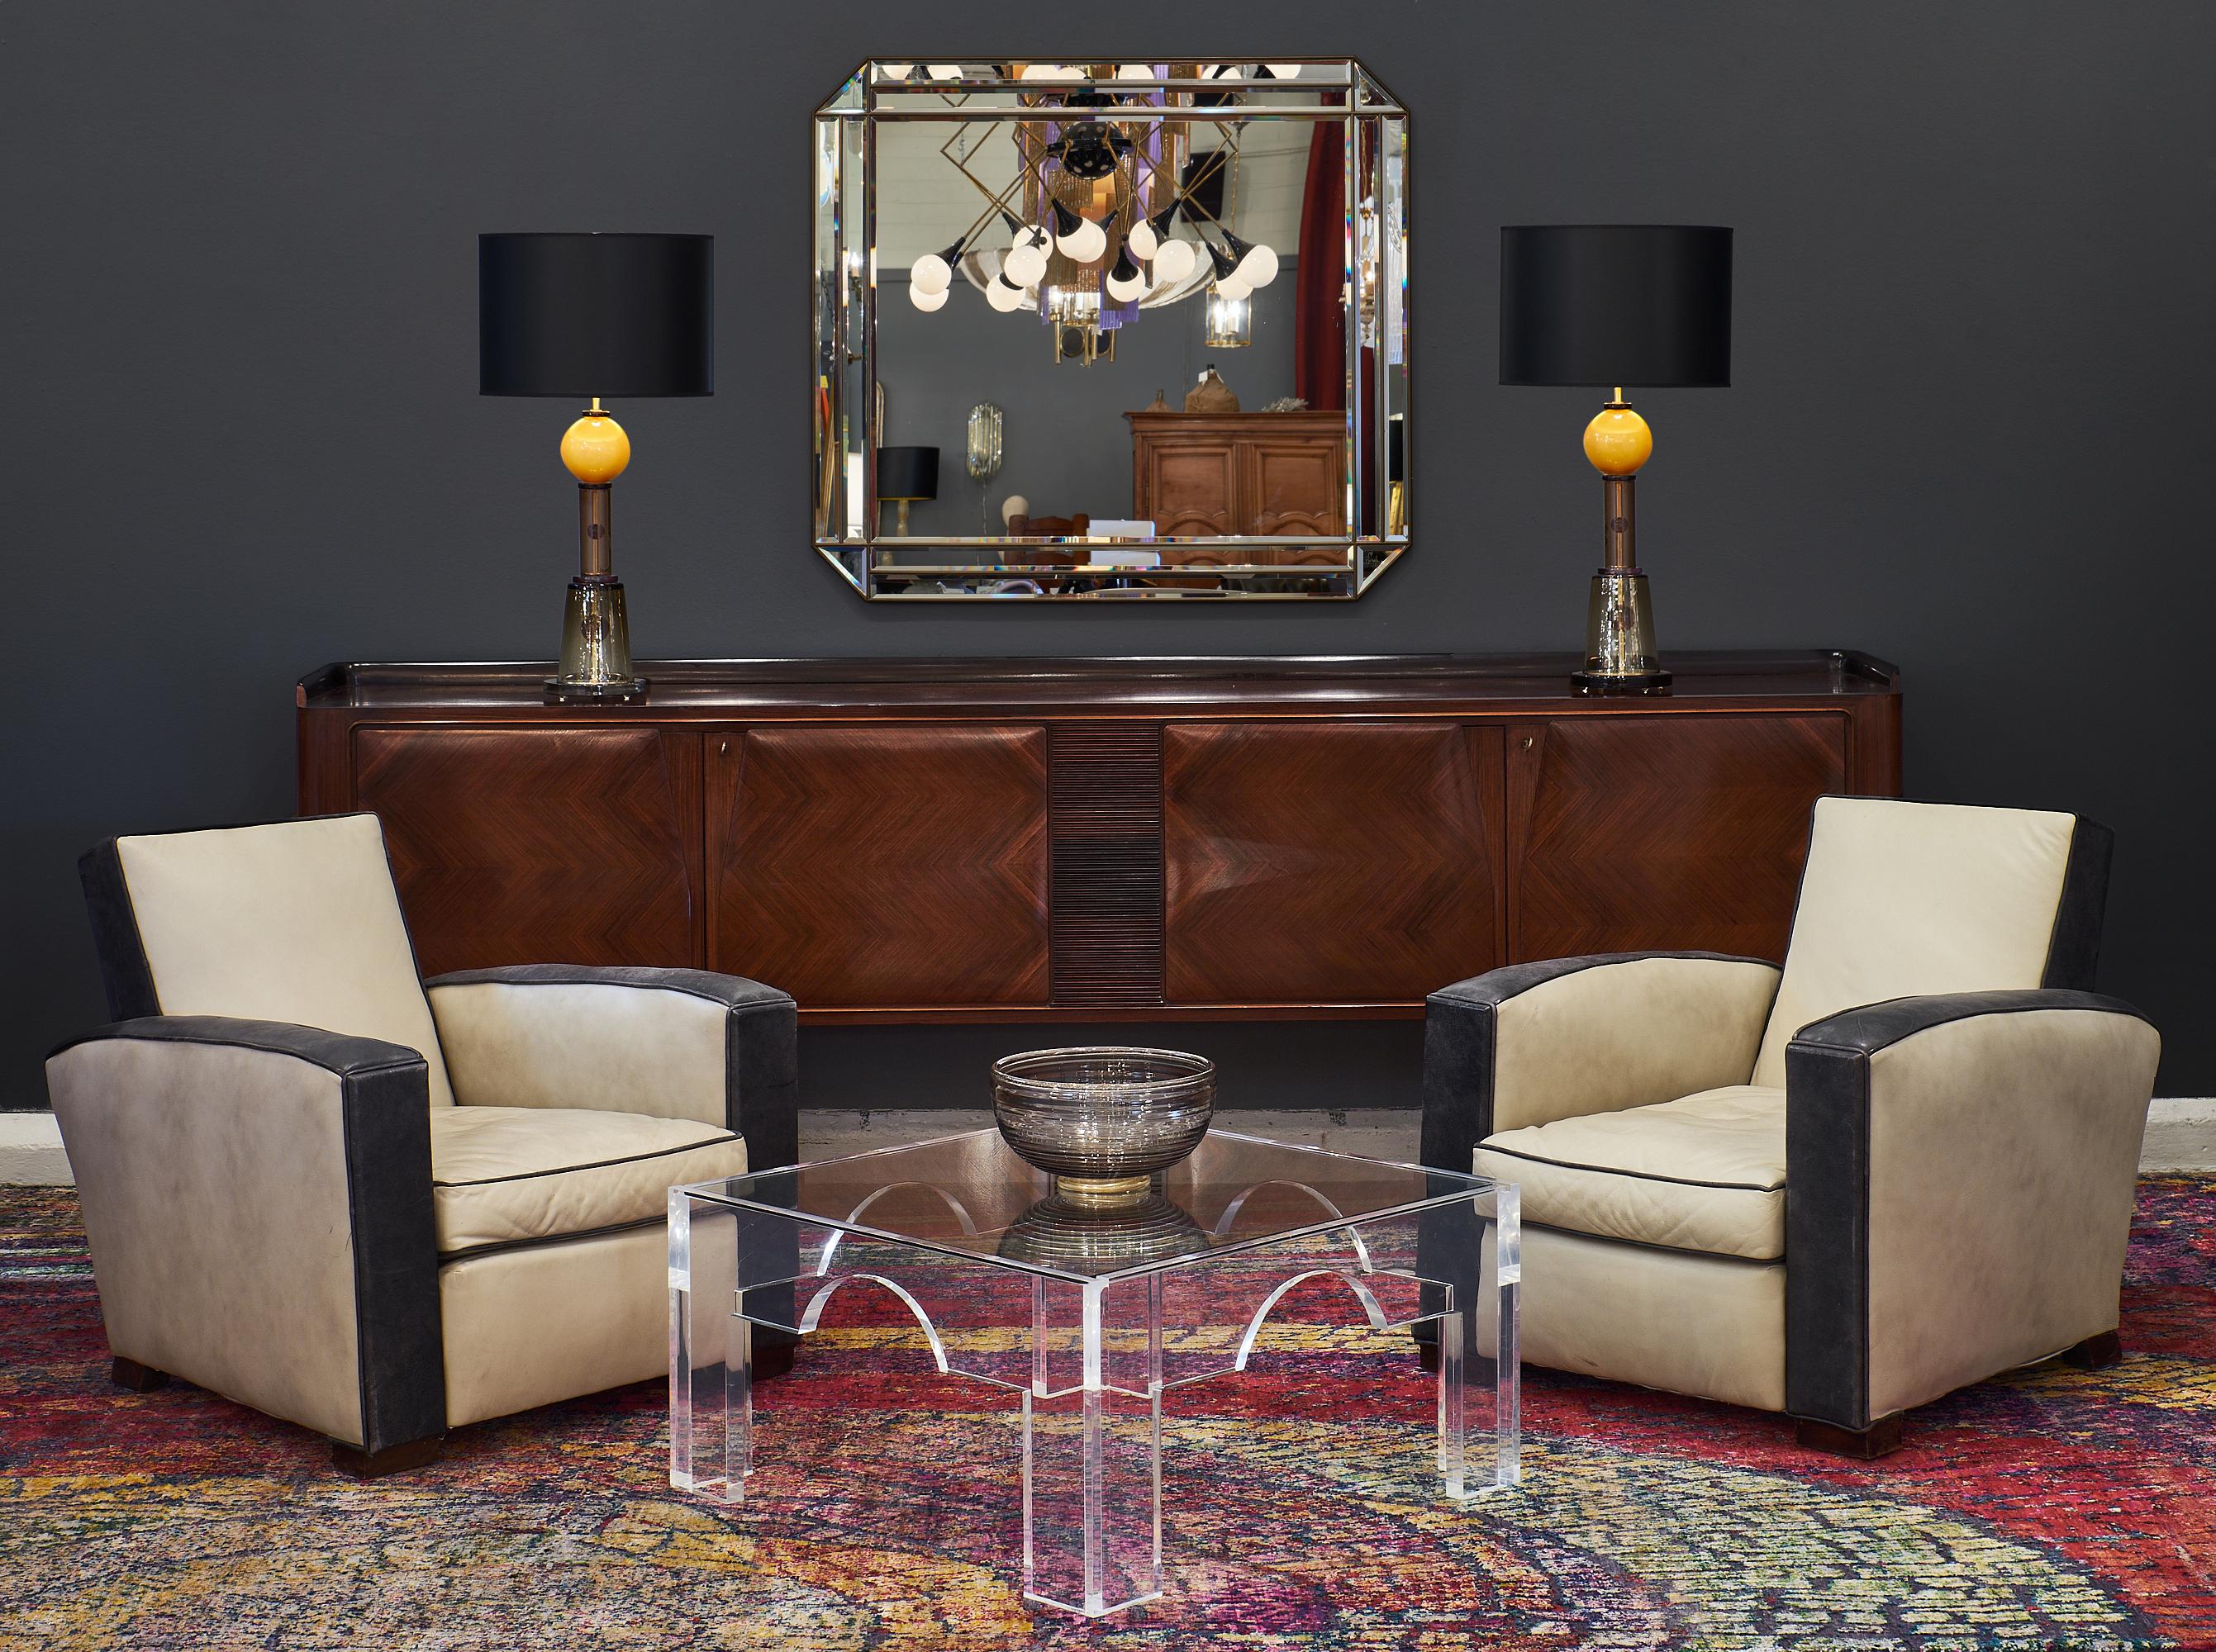 French Lucite and glass coffee tables. This rare pair of Lucite tables features clear glass tops and geometric forms. We love the high quality craftsmanship and square shape.